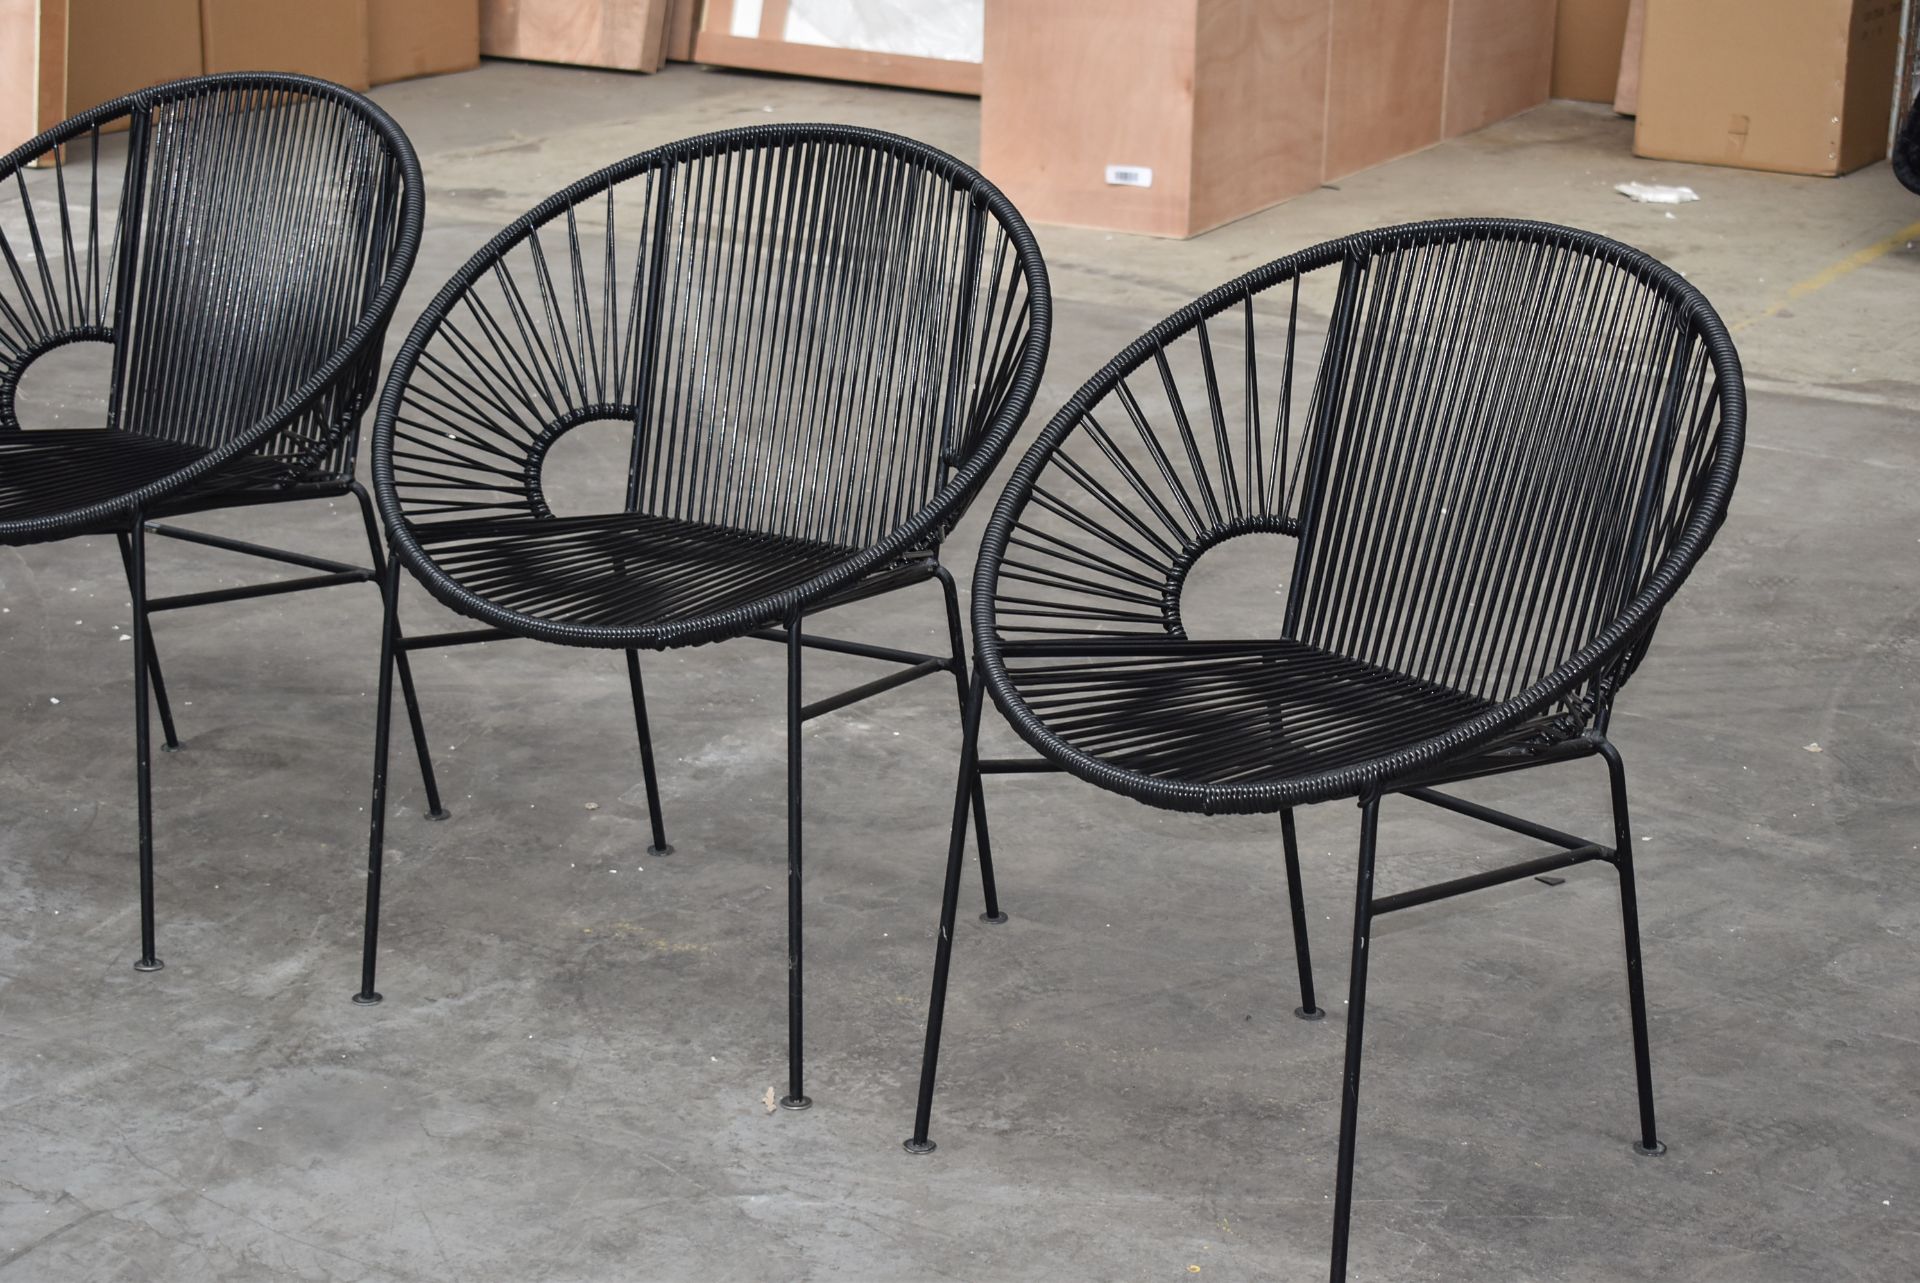 4 x Innit Designer Chairs - Acapulco Style Chairs in Black Suitable For Indoor or Outdoor Use - - Image 3 of 9